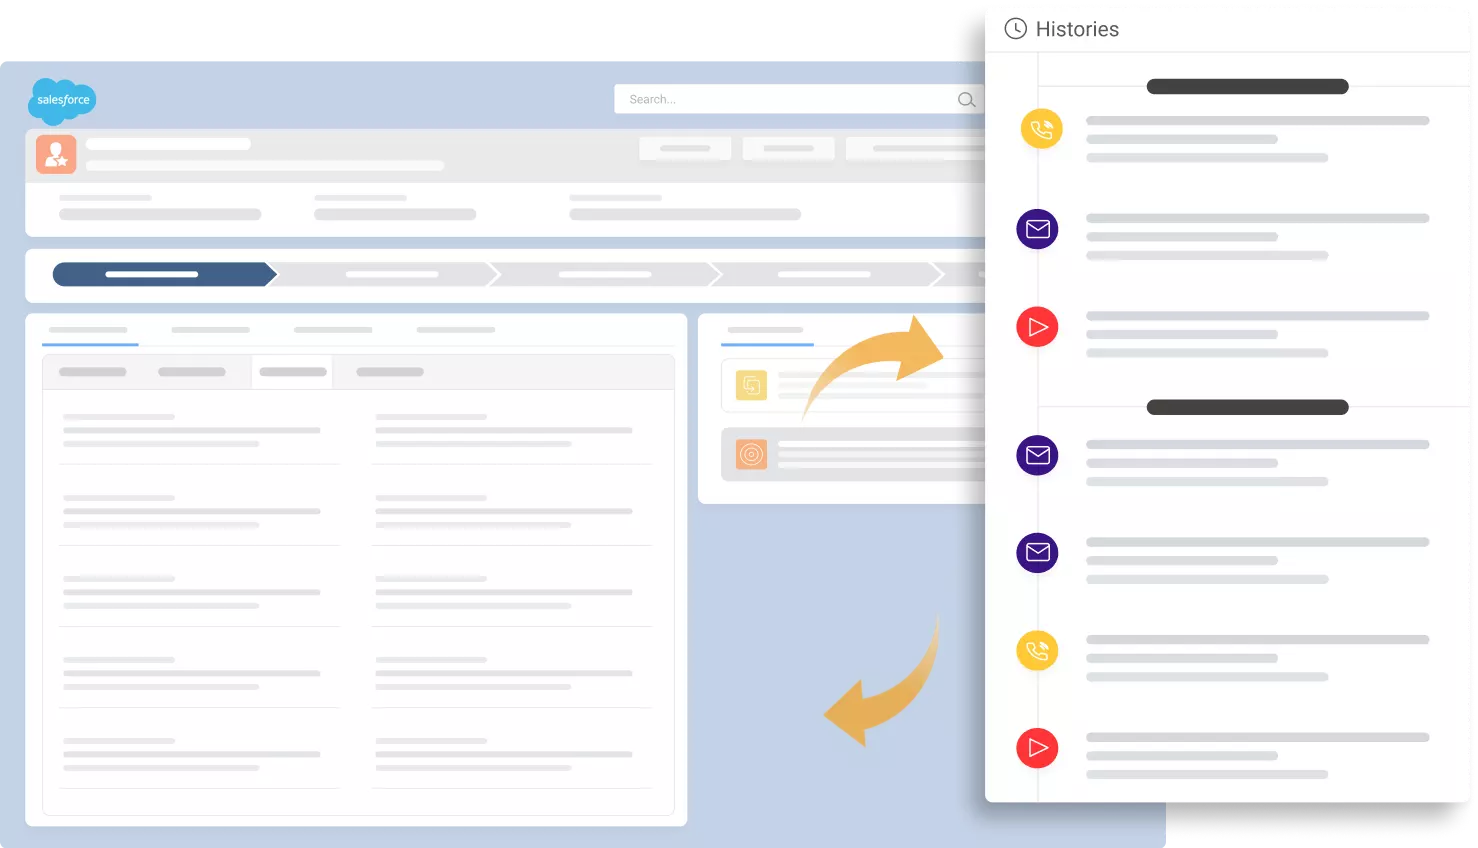 Automatically log sales activities to your CRM.